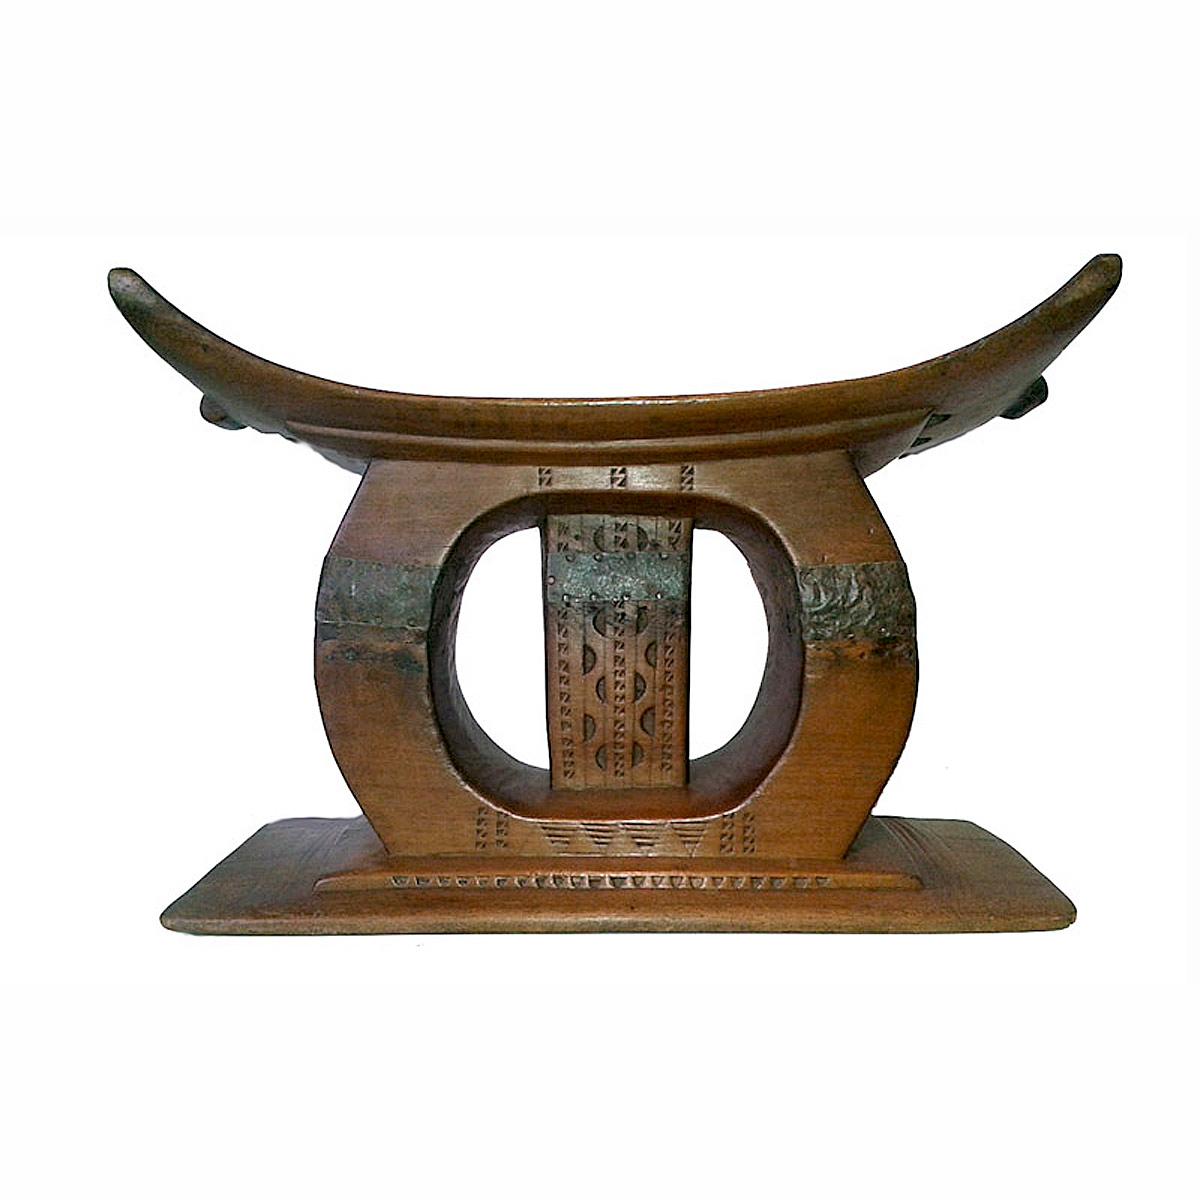 An Ashanti stool, traditional personal stool from Ghana. Mid 1970s. 
Hand-carved from a single piece of teak wood. 

Use as a low end table, stand or seat.